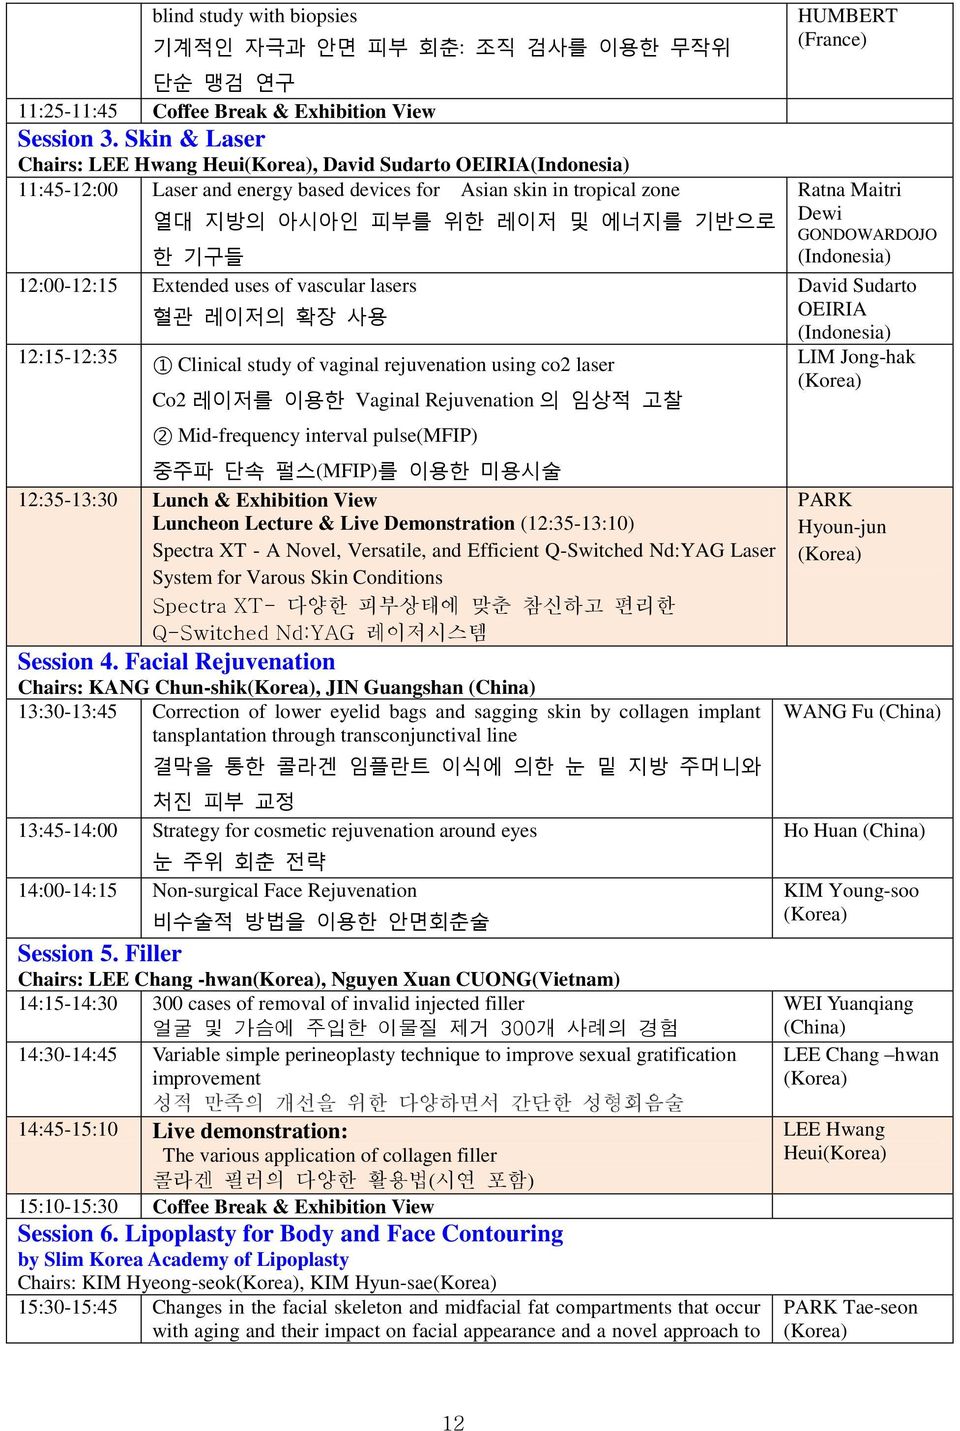 Extended uses of vascular lasers 혈관 레이저의 확장 사용 12:15-12:35 1 Clinical study of vaginal rejuvenation using co2 laser Co2 레이저를 이용한 Vaginal Rejuvenation 의 임상적 고찰 2 Mid-frequency interval pulse(mfip) 중주파